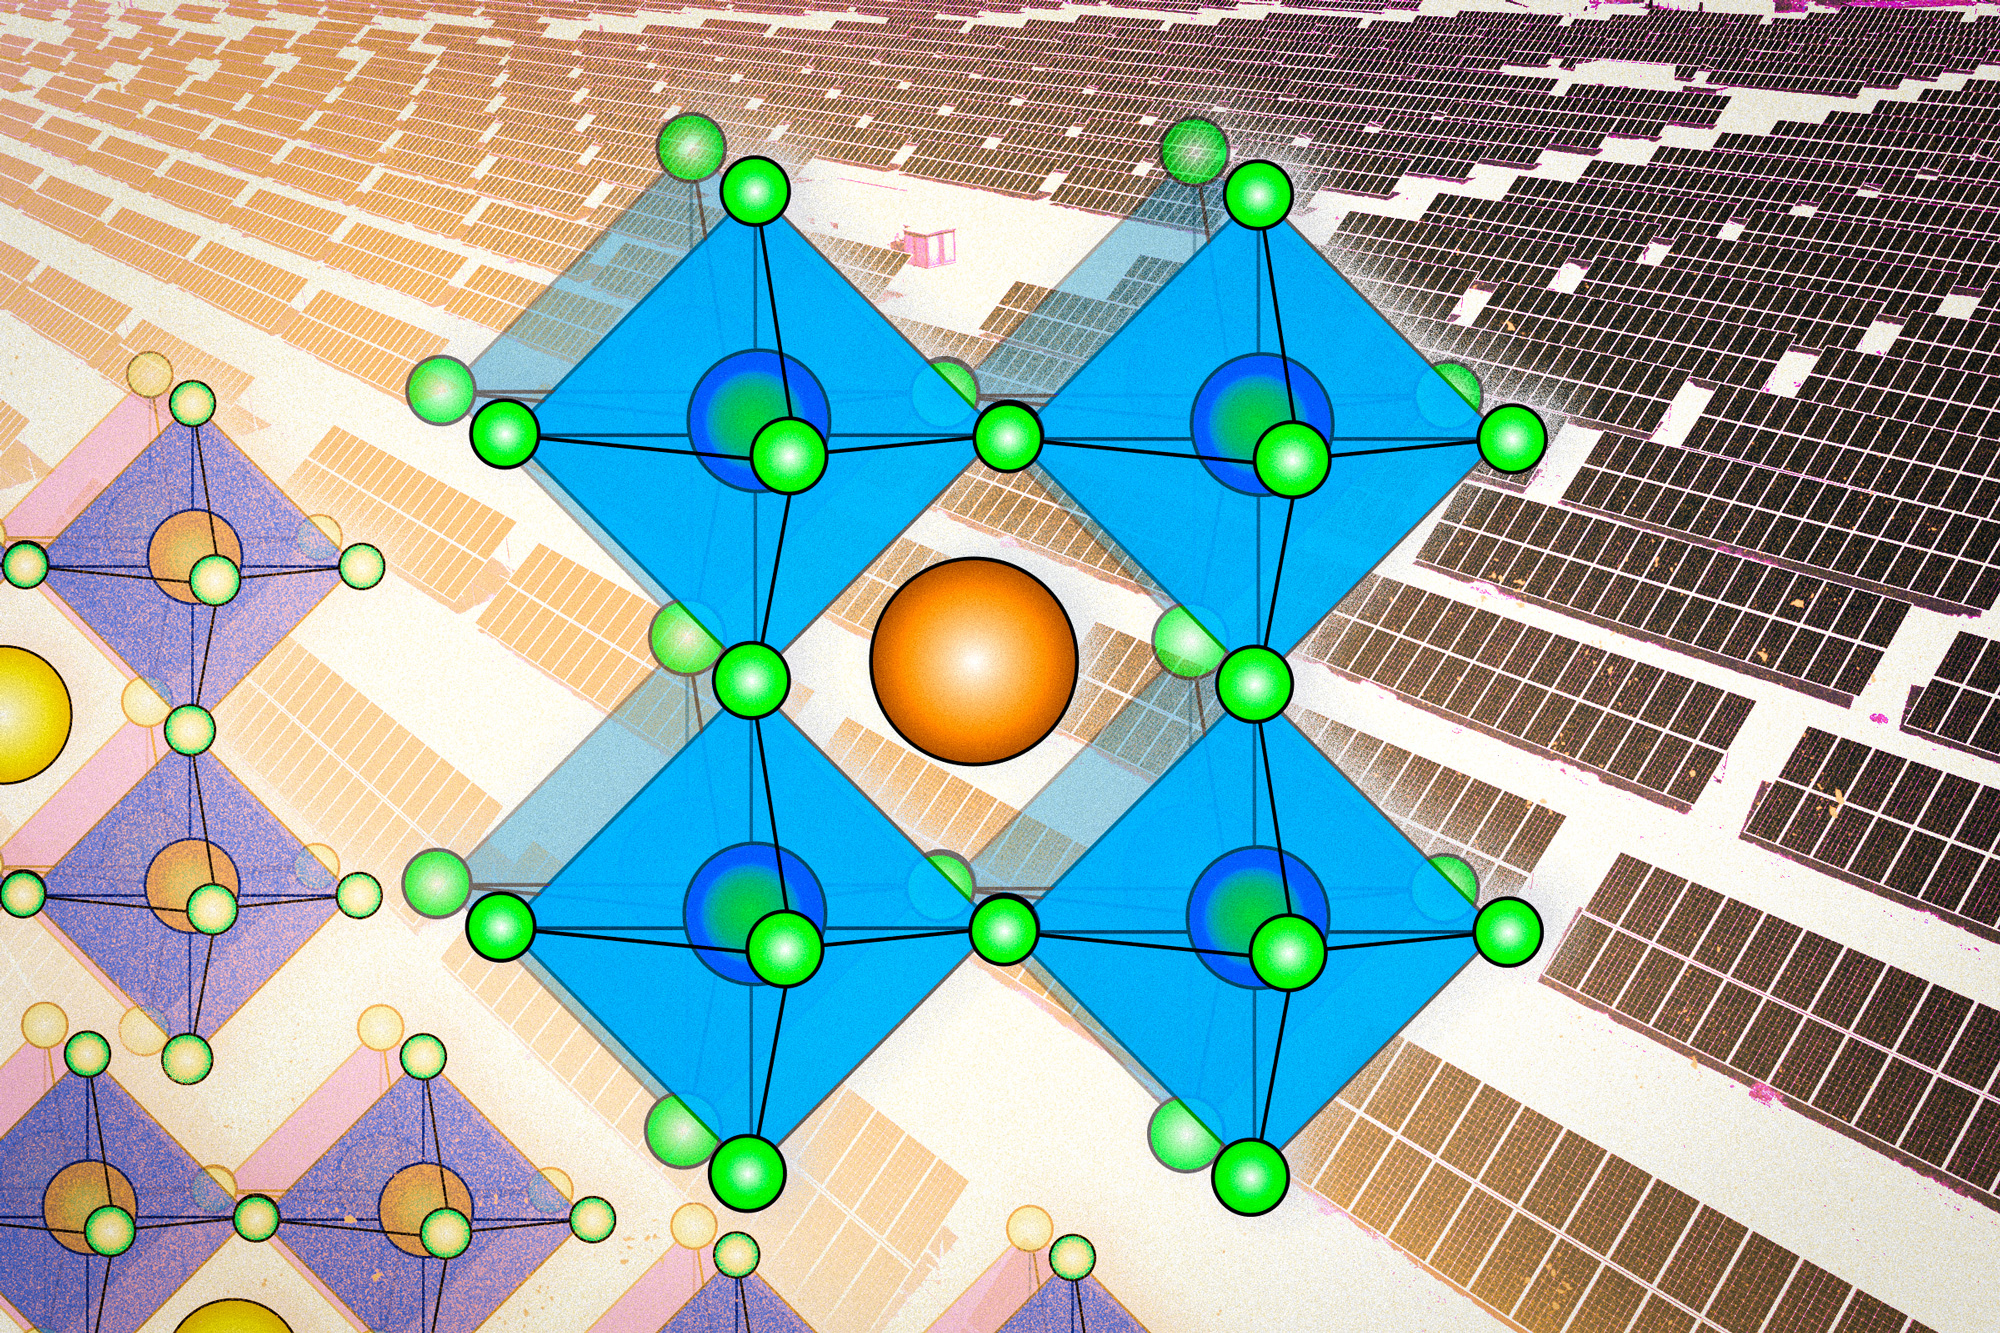 Explained: Why perovskites could take solar cells to new heights